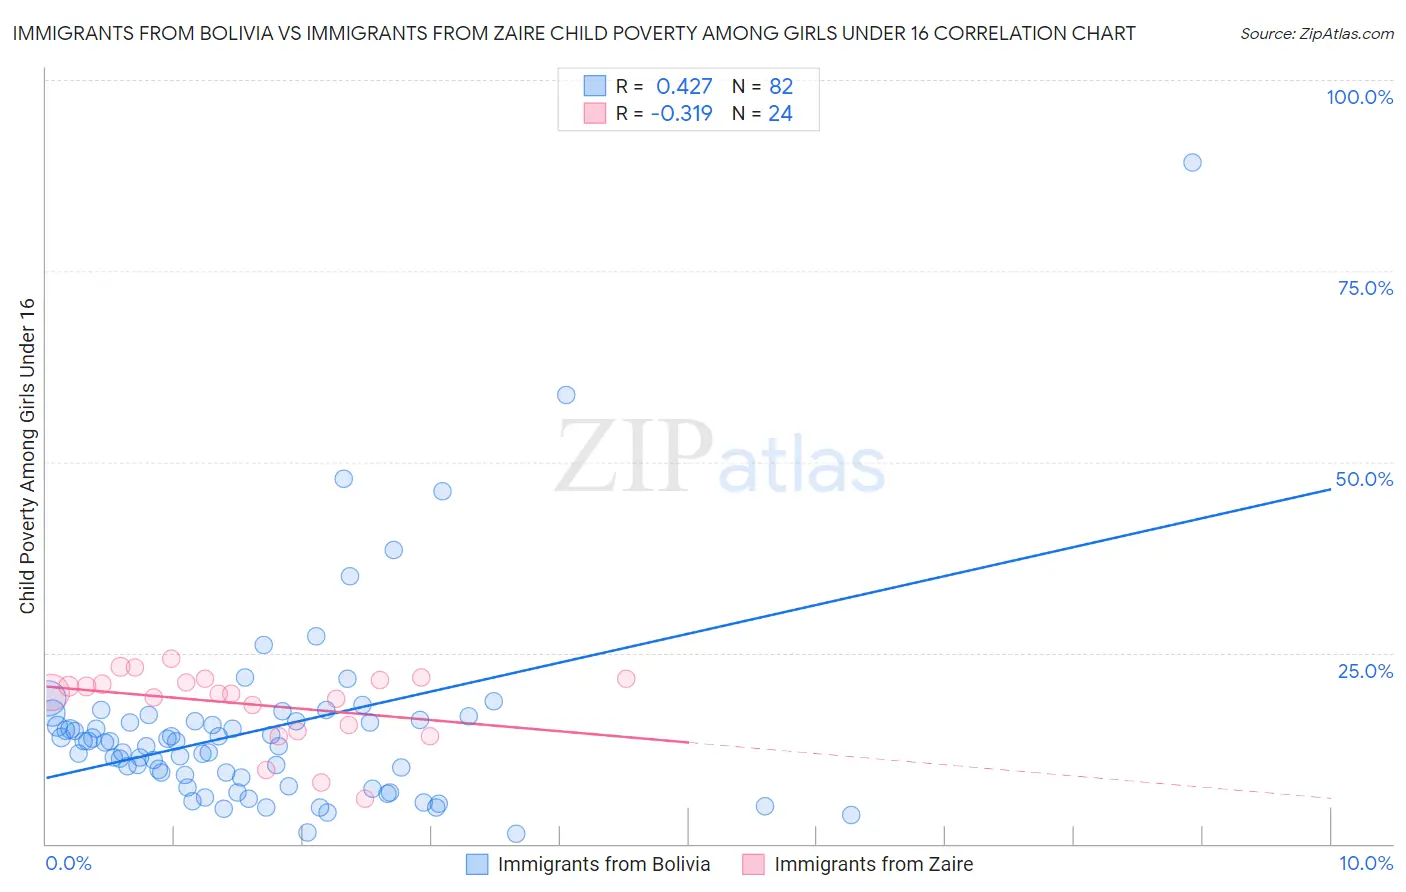 Immigrants from Bolivia vs Immigrants from Zaire Child Poverty Among Girls Under 16